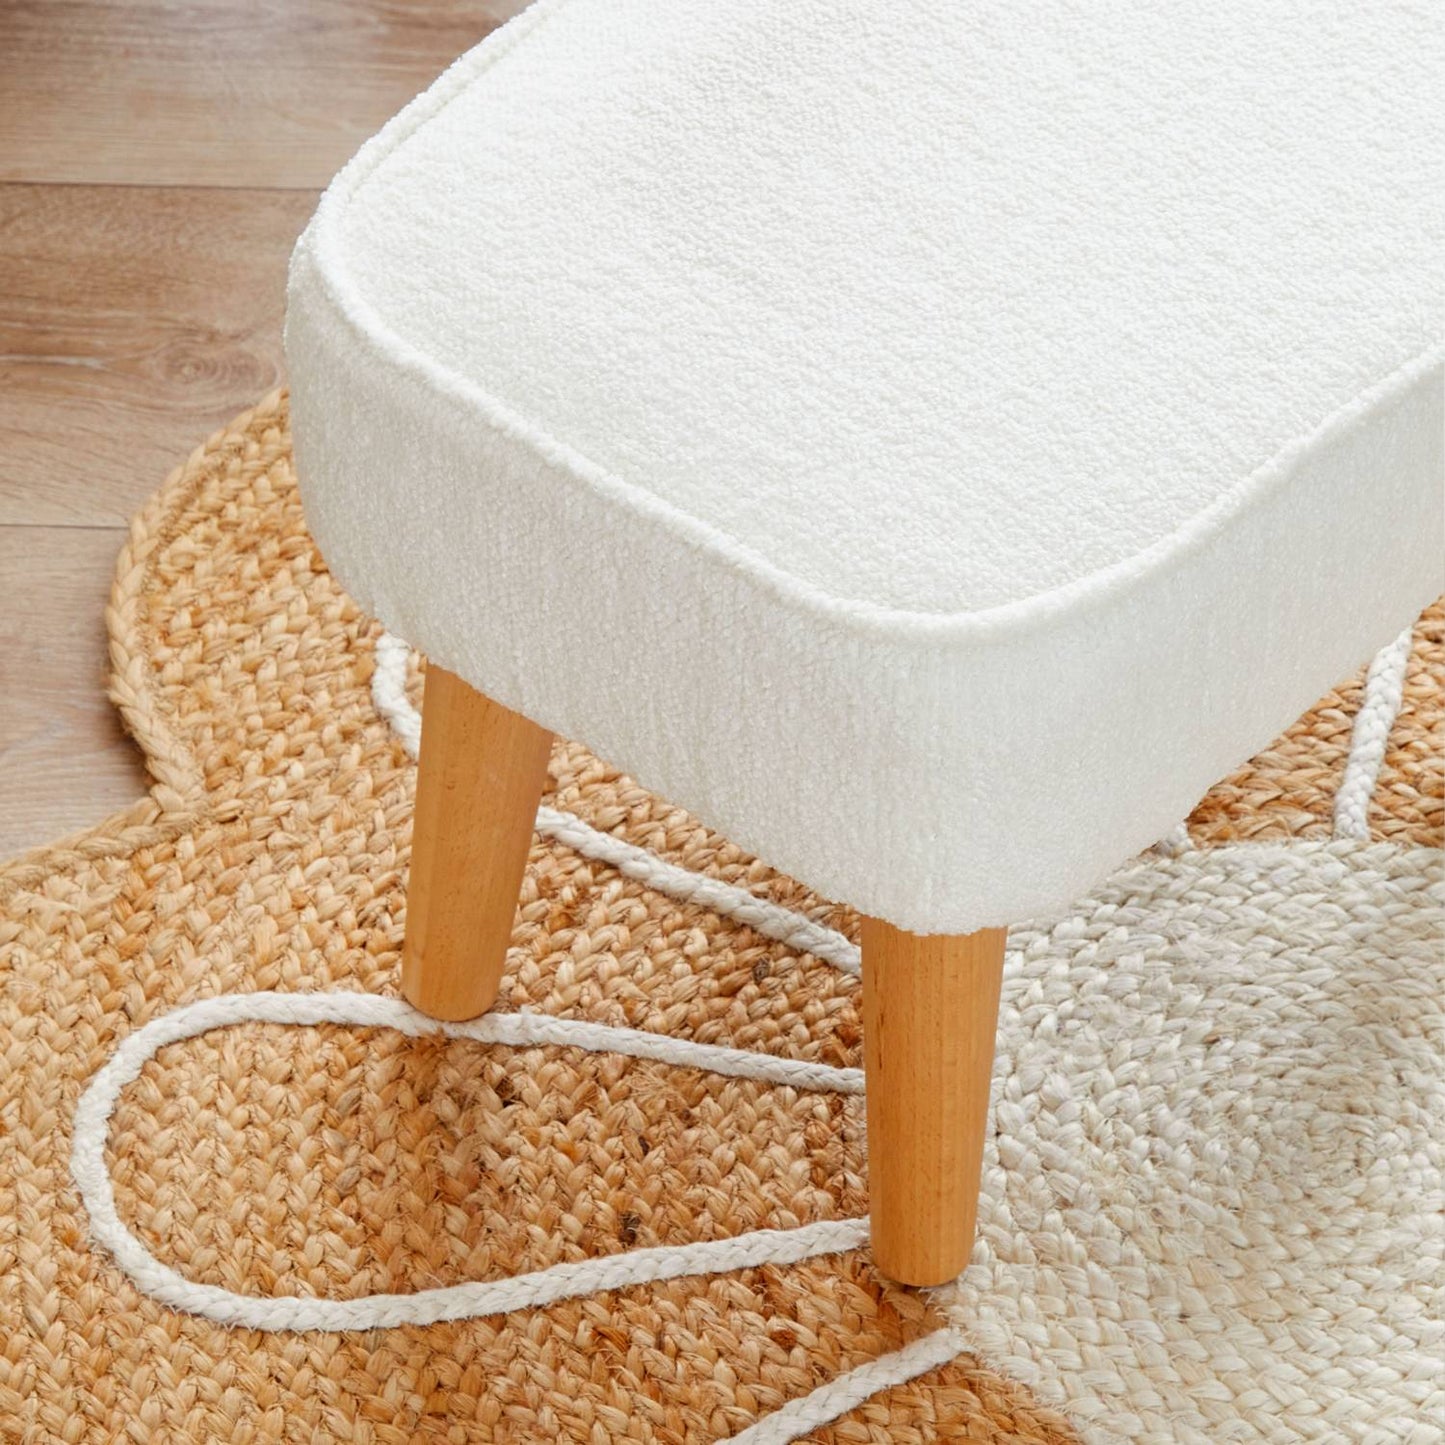 A close-up shot of the Babymore Freya Footstool in Off White Boucle color placed on a natural fiber rug and showing the natural solid beech wood legs.